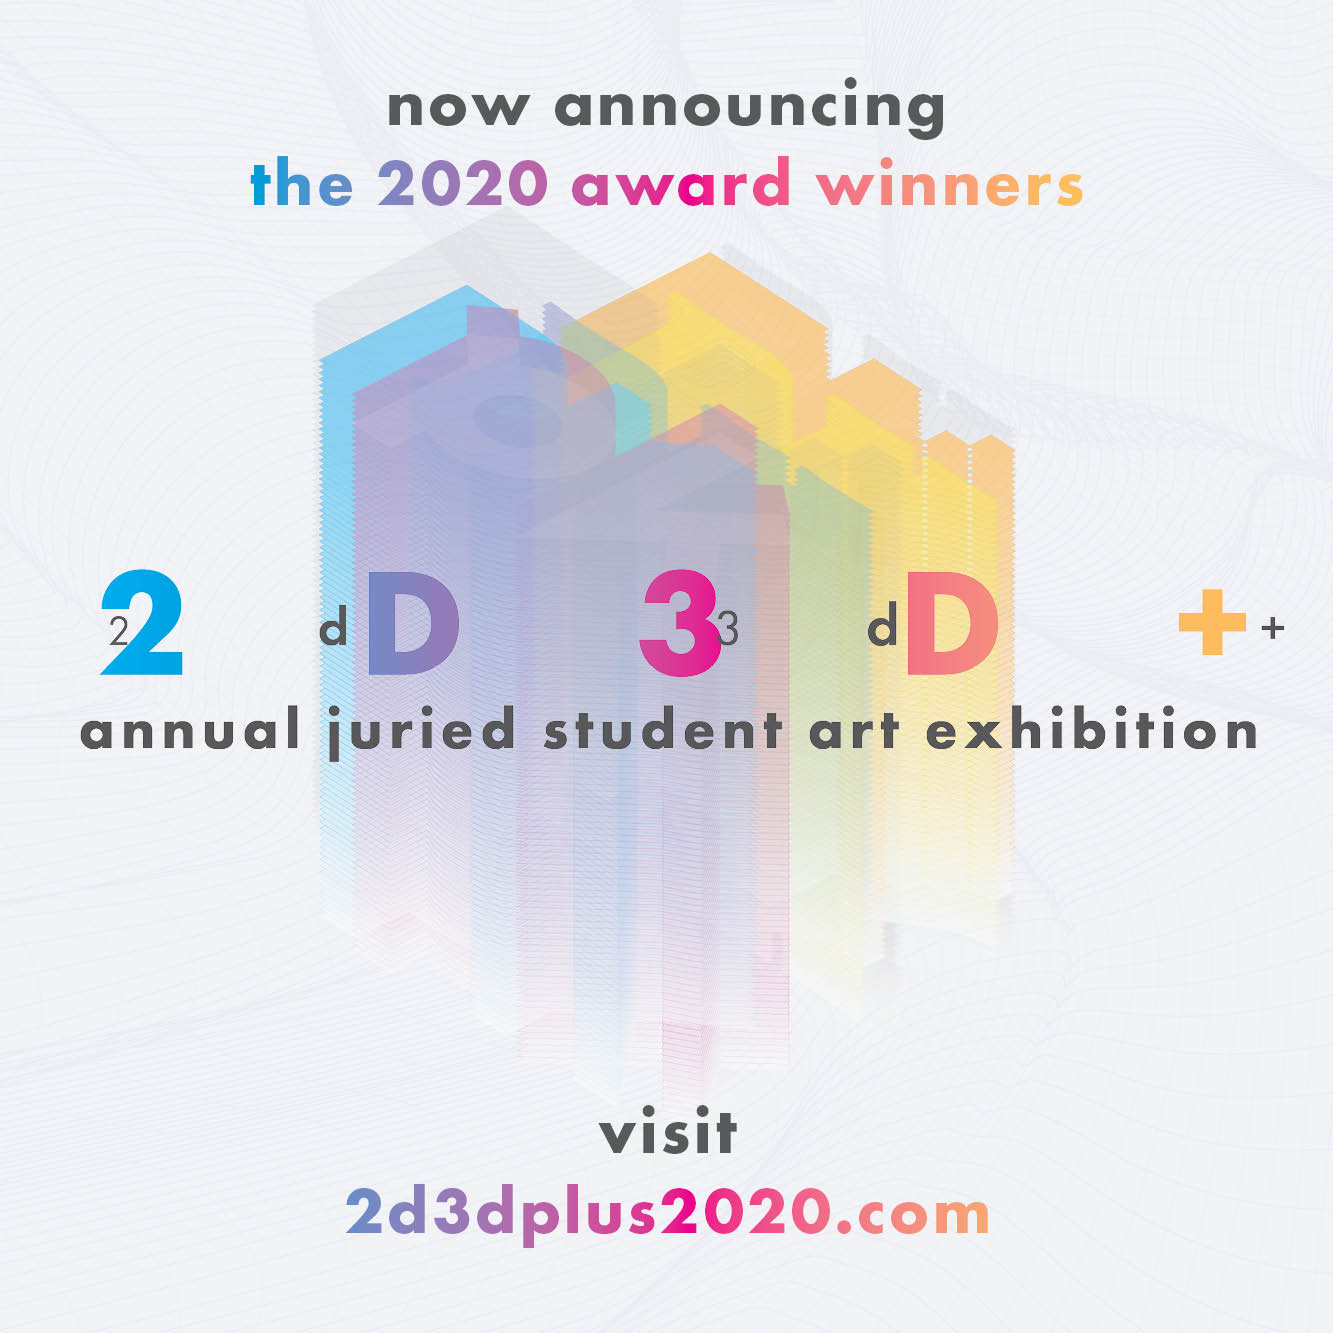 white graphic with grey and multicolored letters: now announcing the 2020 award winners. 2d3d+ annual juried student art exhibition. visit 2d3dplus2020.com